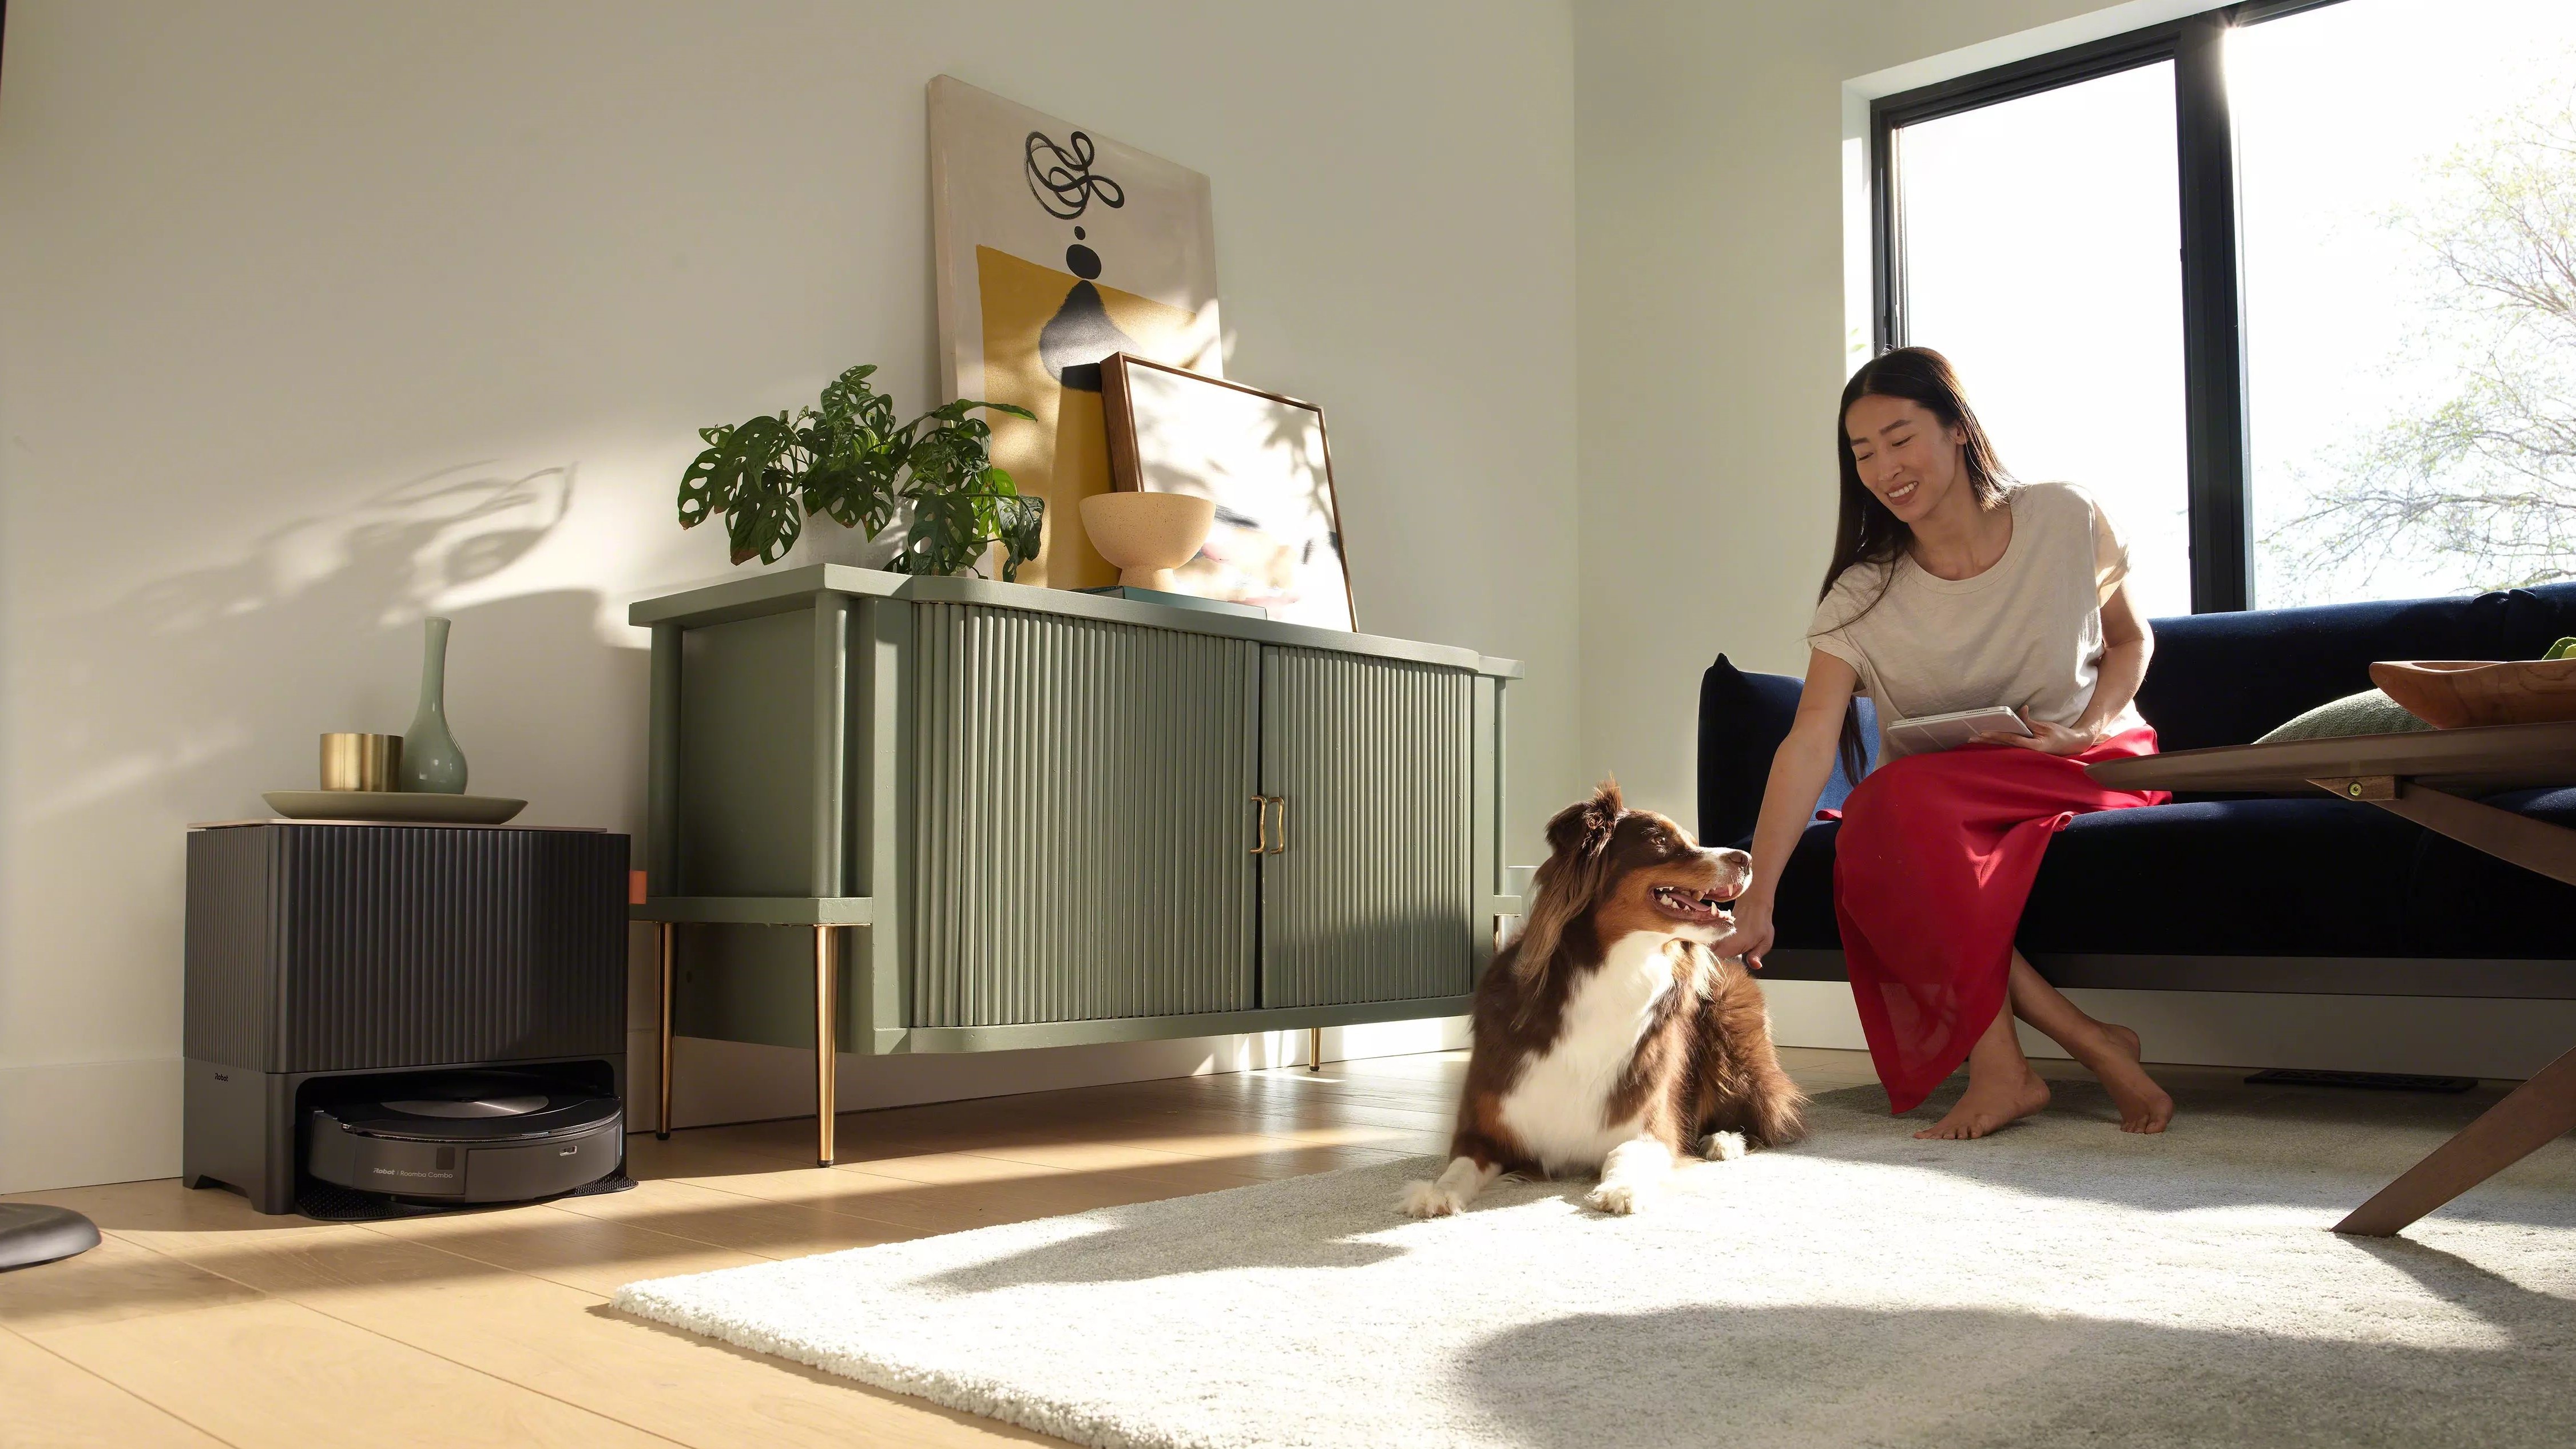 The Roomba Combo j9+ sits on its dock in someone's living room while someone feeds their dog on the couch